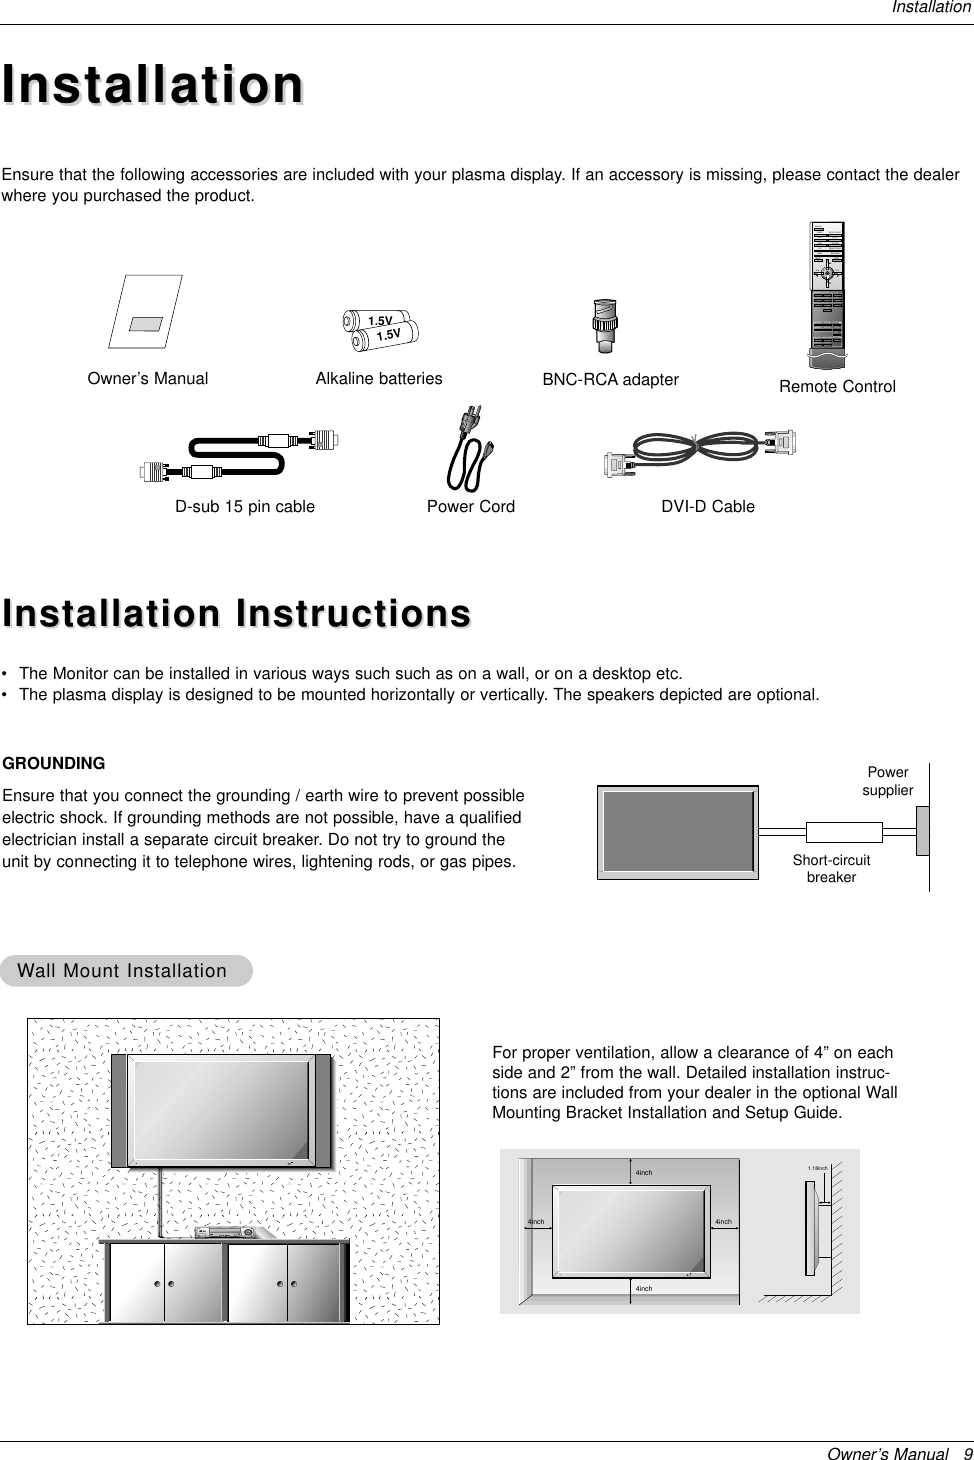 Owner’s Manual   9InstallationInstallationInstallationD-sub 15 pin cableOwner’s Manual1.5V1.5VAlkaline batteries BNC-RCA adapterPower Cord1234567809POWERSLEEP INPUT SELECTAPC DASPARC PIP ARCPIPTWIN PICTURESWAPMENU MUTEOKVOLPOWER STOPPLAY FFRECREWP/STILLWIN.SIZEWIN.POSITIONZOOM +ZOOM -SPLIT ZOOMVOLSUB INPUTRemote ControlDVI-D CableEnsure that the following accessories are included with your plasma display. If an accessory is missing, please contact the dealerwhere you purchased the product.Installation InstructionsInstallation Instructions•The Monitor can be installed in various ways such such as on a wall, or on a desktop etc.•The plasma display is designed to be mounted horizontally or vertically. The speakers depicted are optional.GROUNDINGEnsure that you connect the grounding / earth wire to prevent possibleelectric shock. If grounding methods are not possible, have a qualifiedelectrician install a separate circuit breaker. Do not try to ground theunit by connecting it to telephone wires, lightening rods, or gas pipes.PowersupplierShort-circuitbreaker4inch4inch4inch4inch1.18inchWWall Mount Installationall Mount InstallationFor proper ventilation, allow a clearance of 4” on eachside and 2” from the wall. Detailed installation instruc-tions are included from your dealer in the optional WallMounting Bracket Installation and Setup Guide.